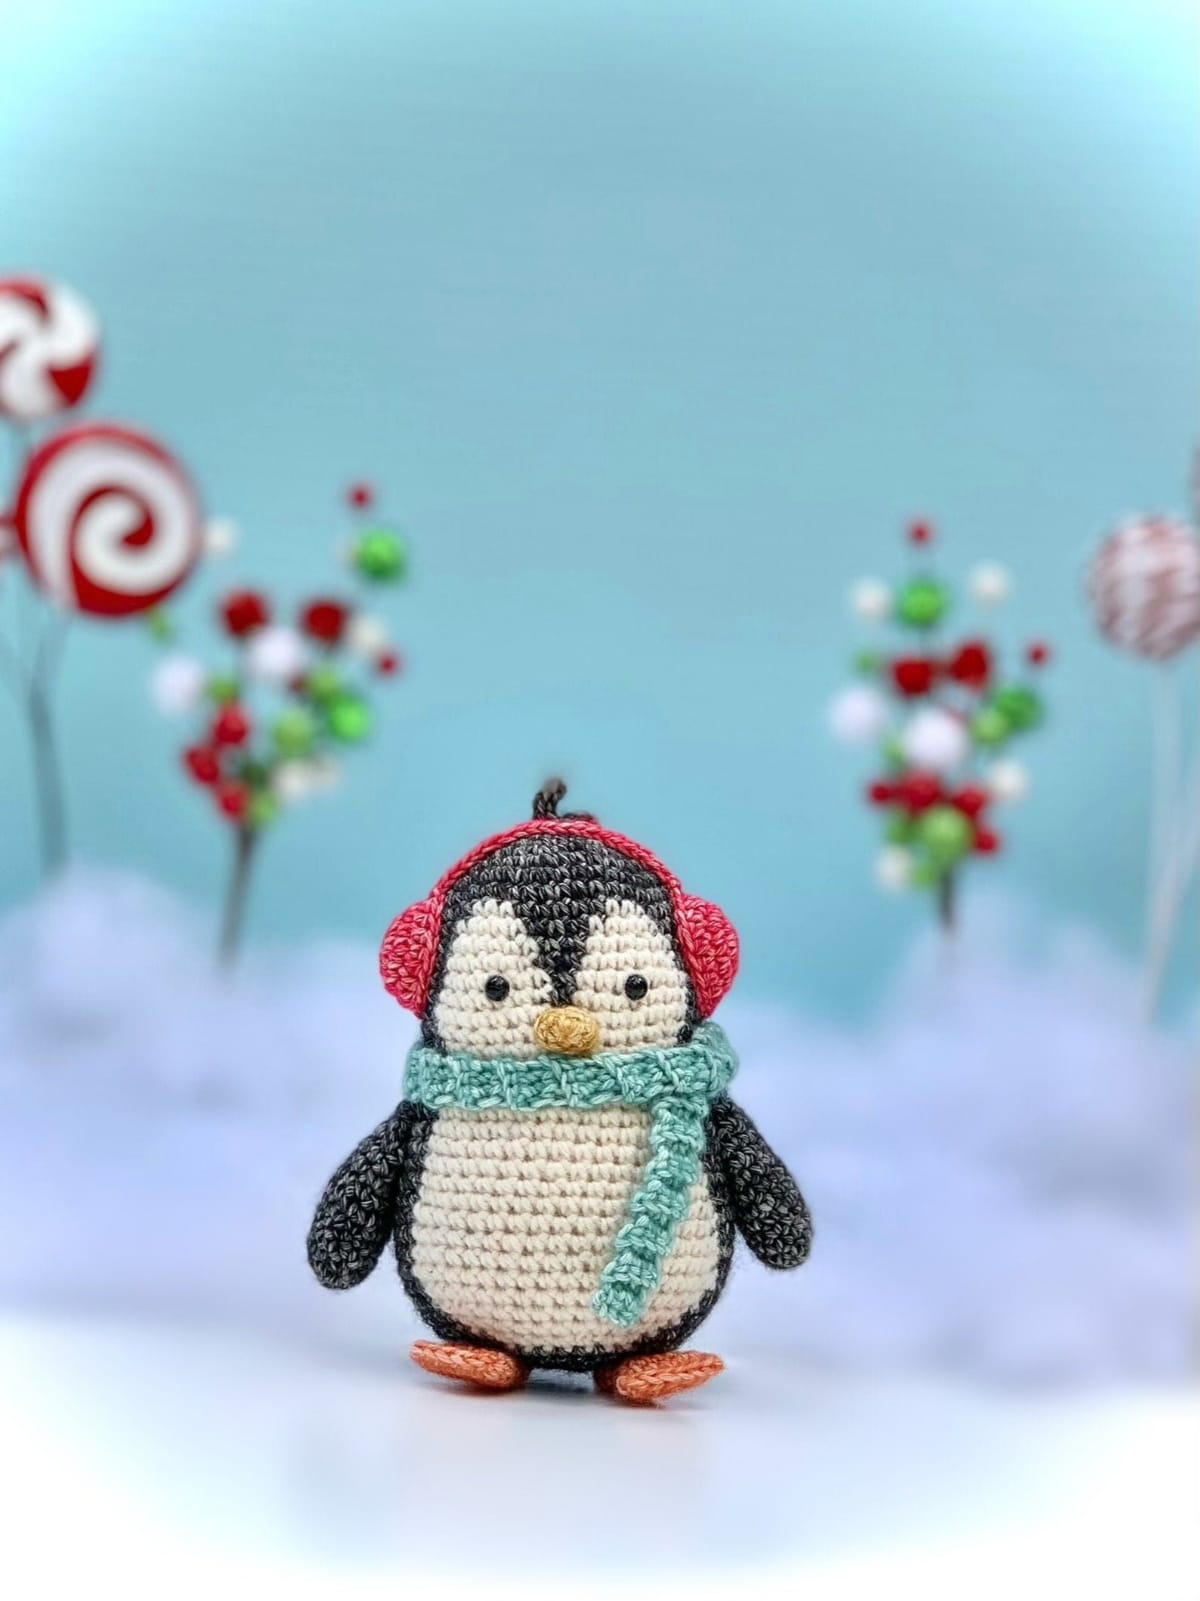 Small crochet black and white penguin wearing a blue scarf around its neck and red earmuffs in front of a snowy background with candy canes.